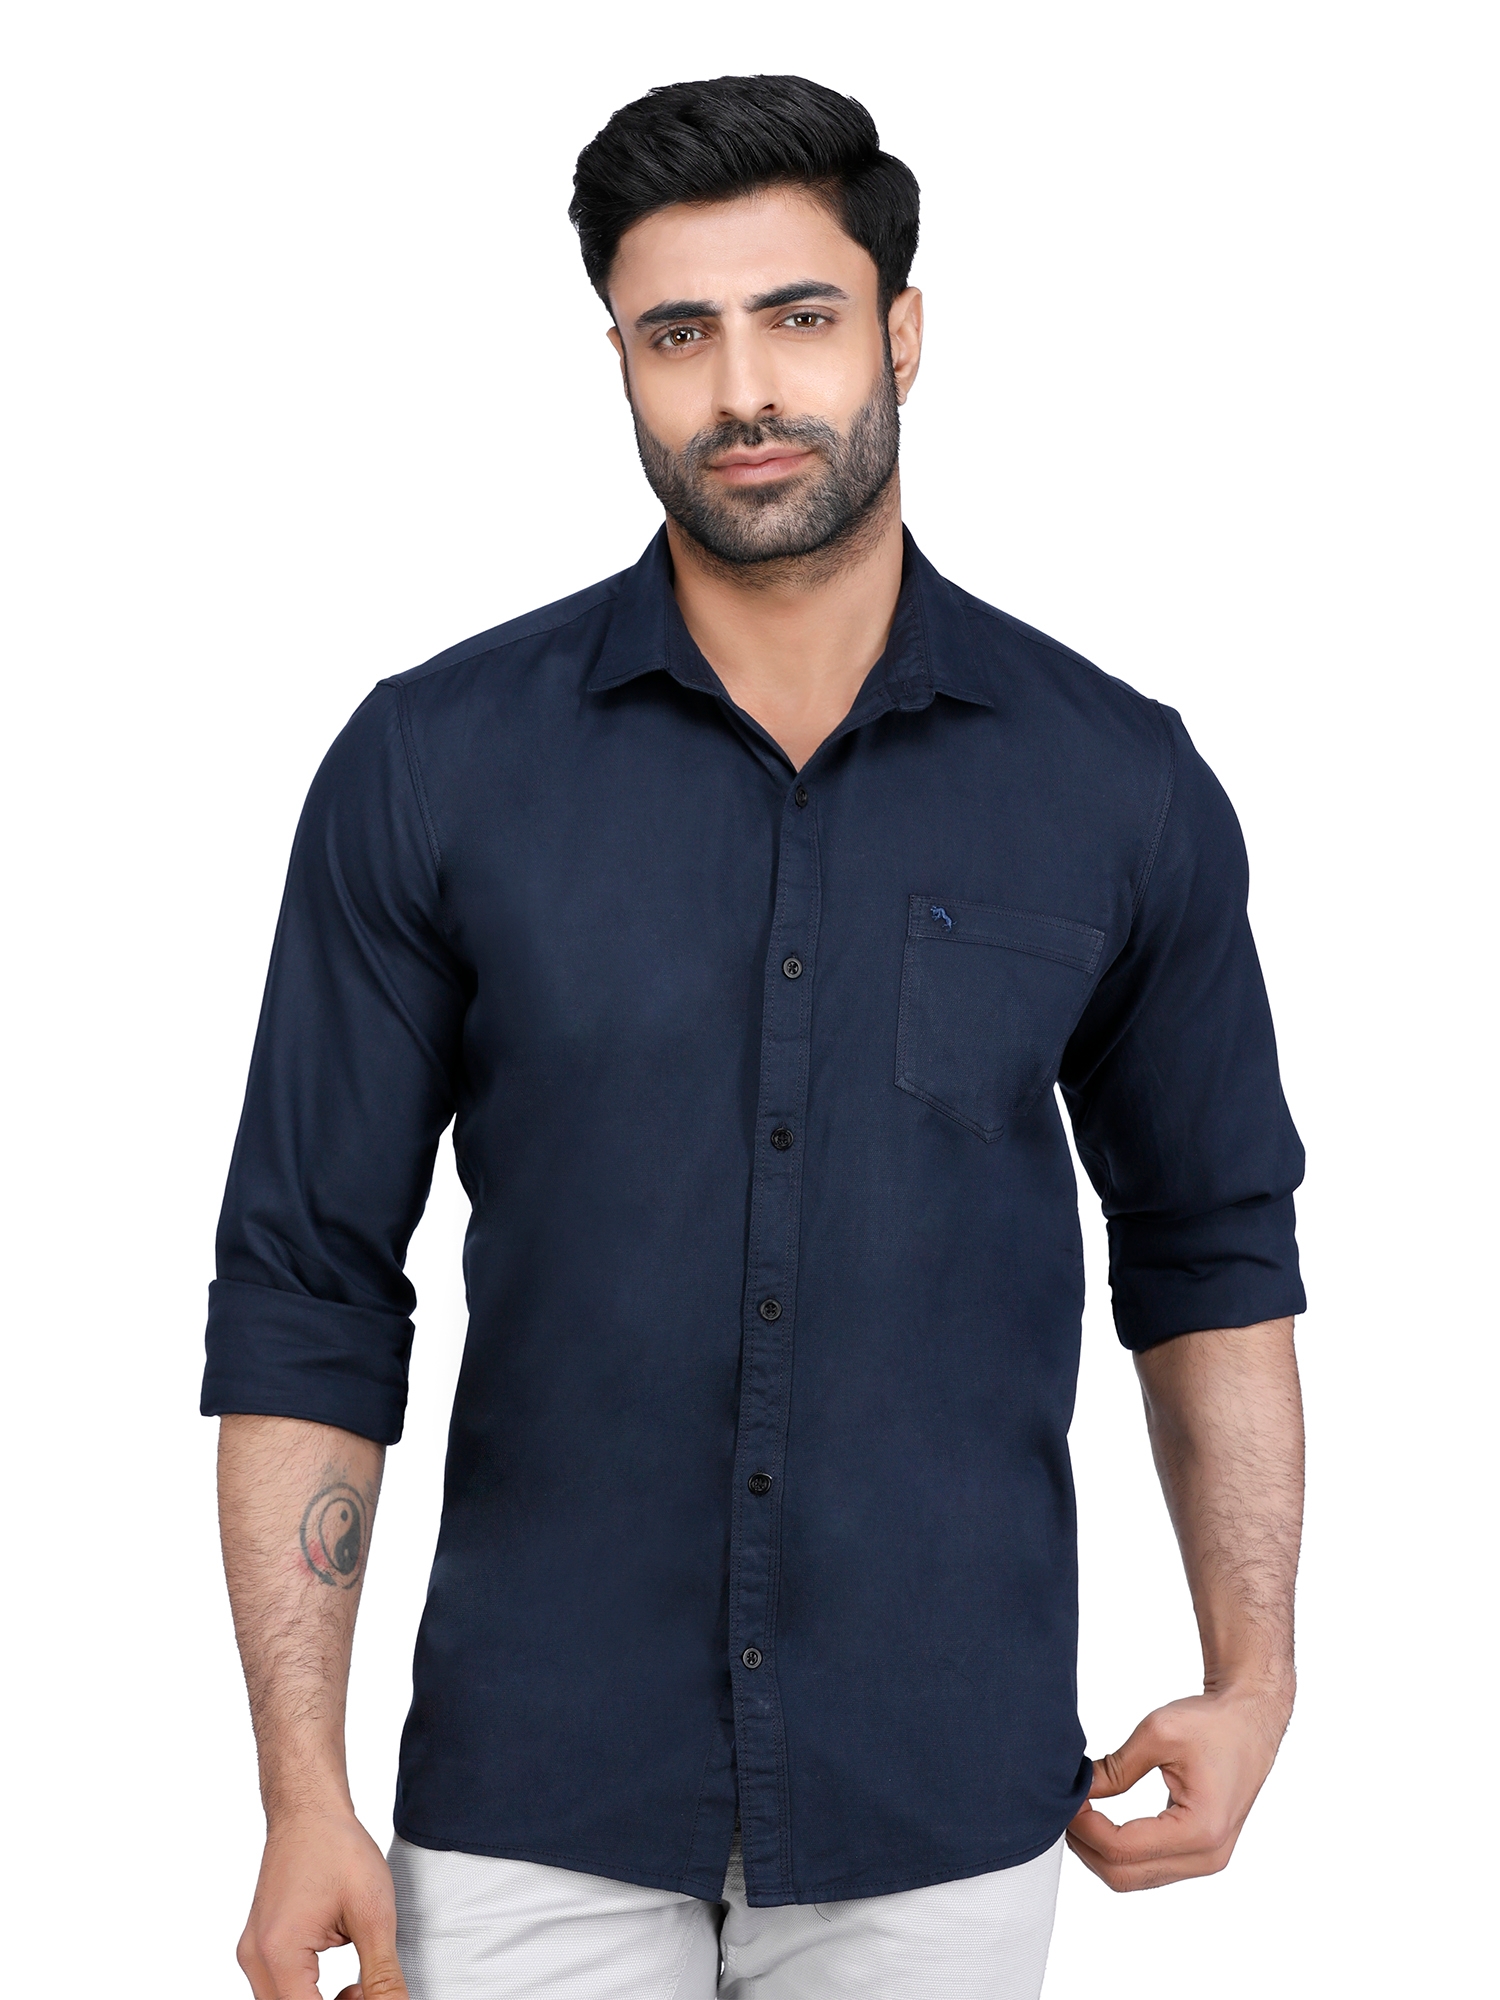 D'cot by Donear Men Blue Cotton Slim Solid Casual Shirts